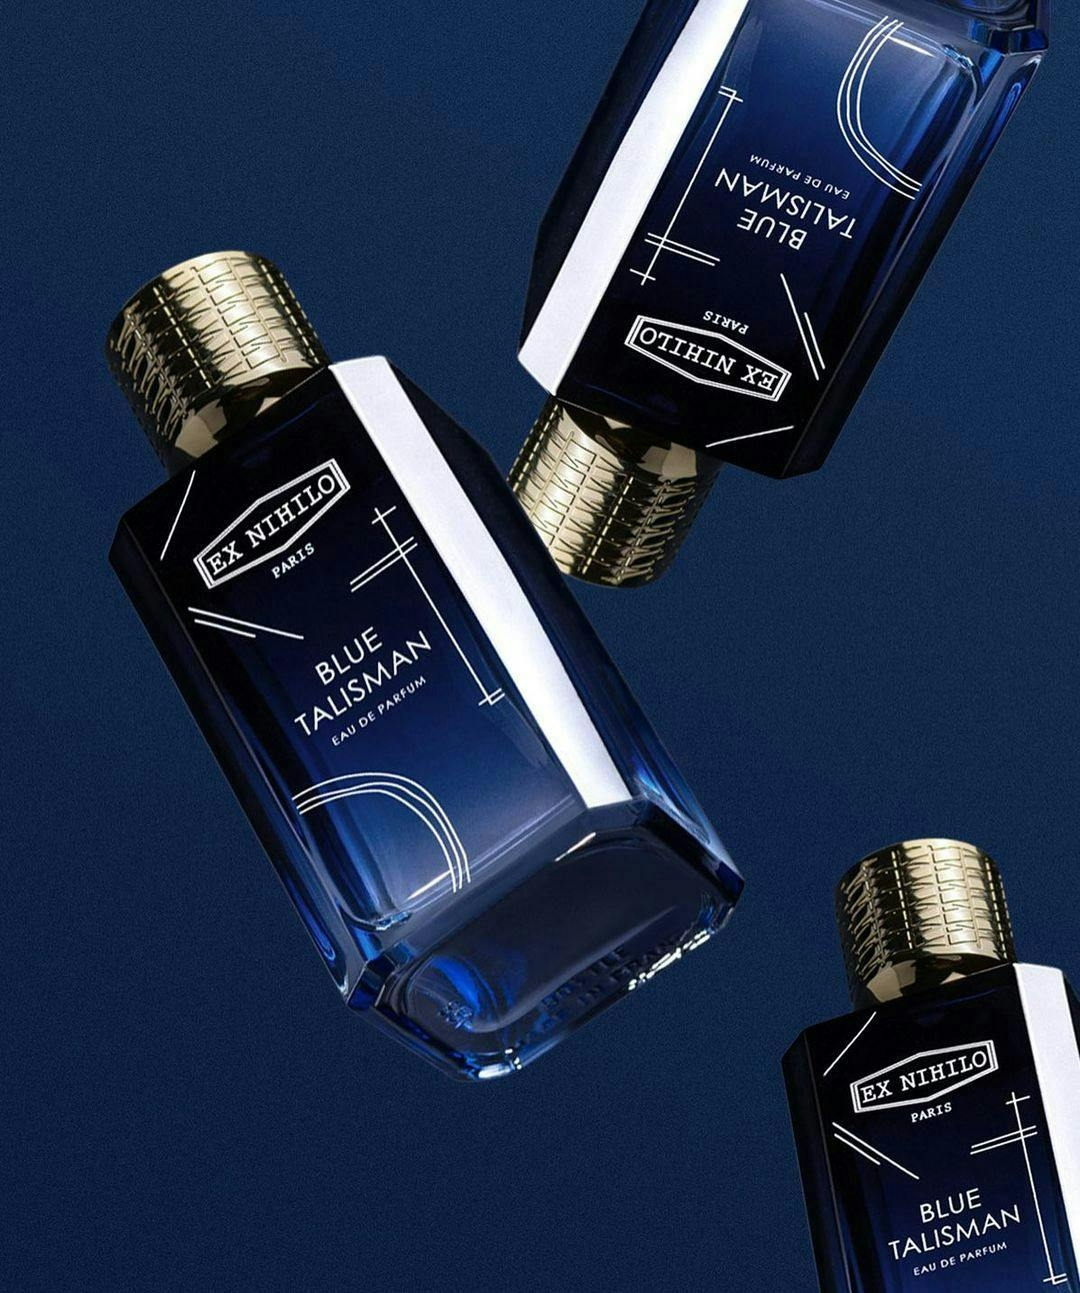 bottle cosmetics perfume aftershave